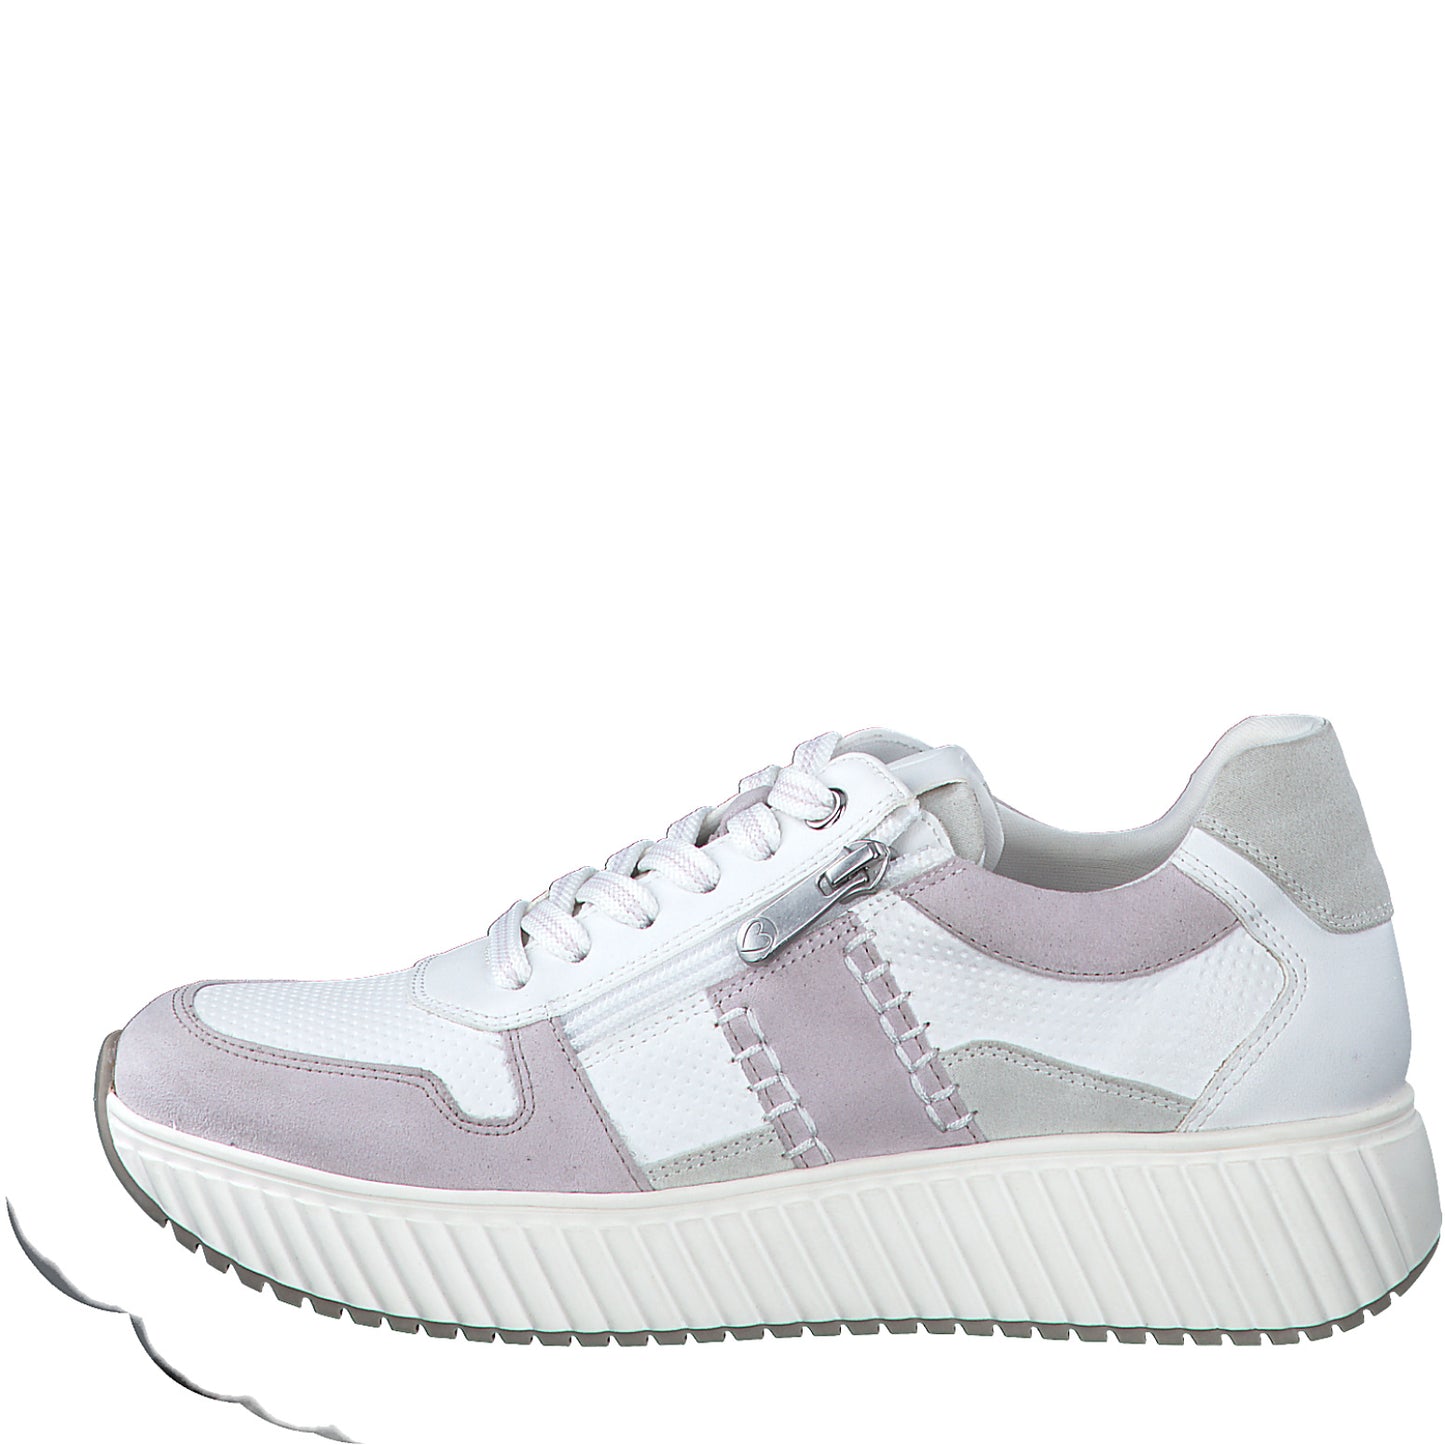 Marco Tozzi - Ladies Shoes Trainers White, Lilac (2200)